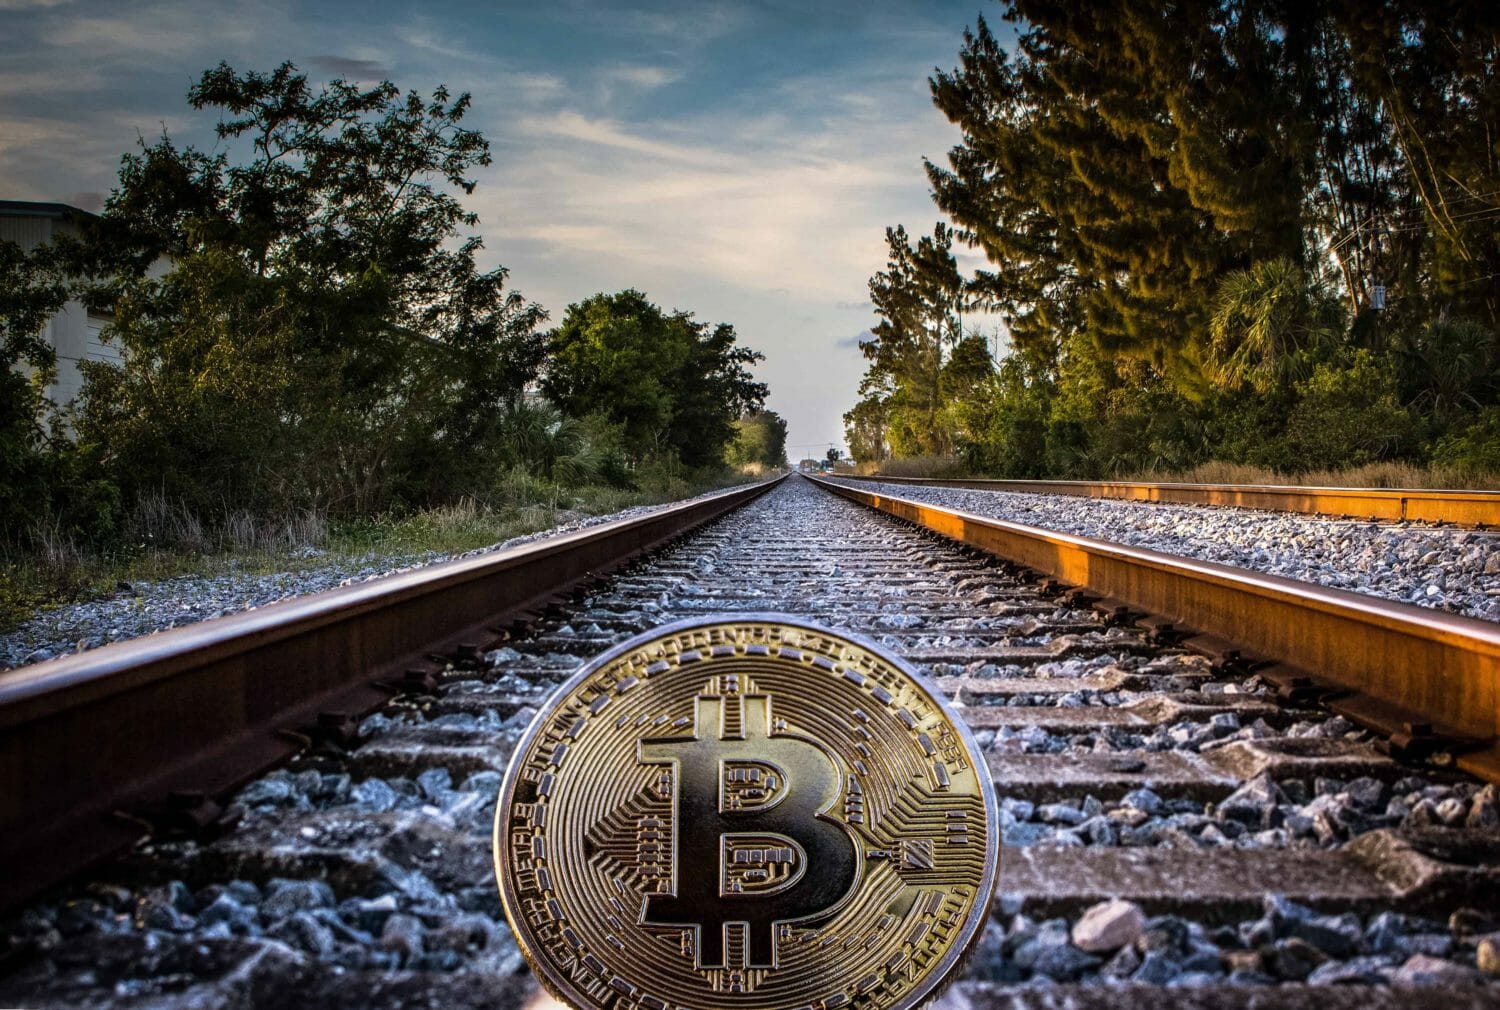 The road ahead with this Bitcoin.